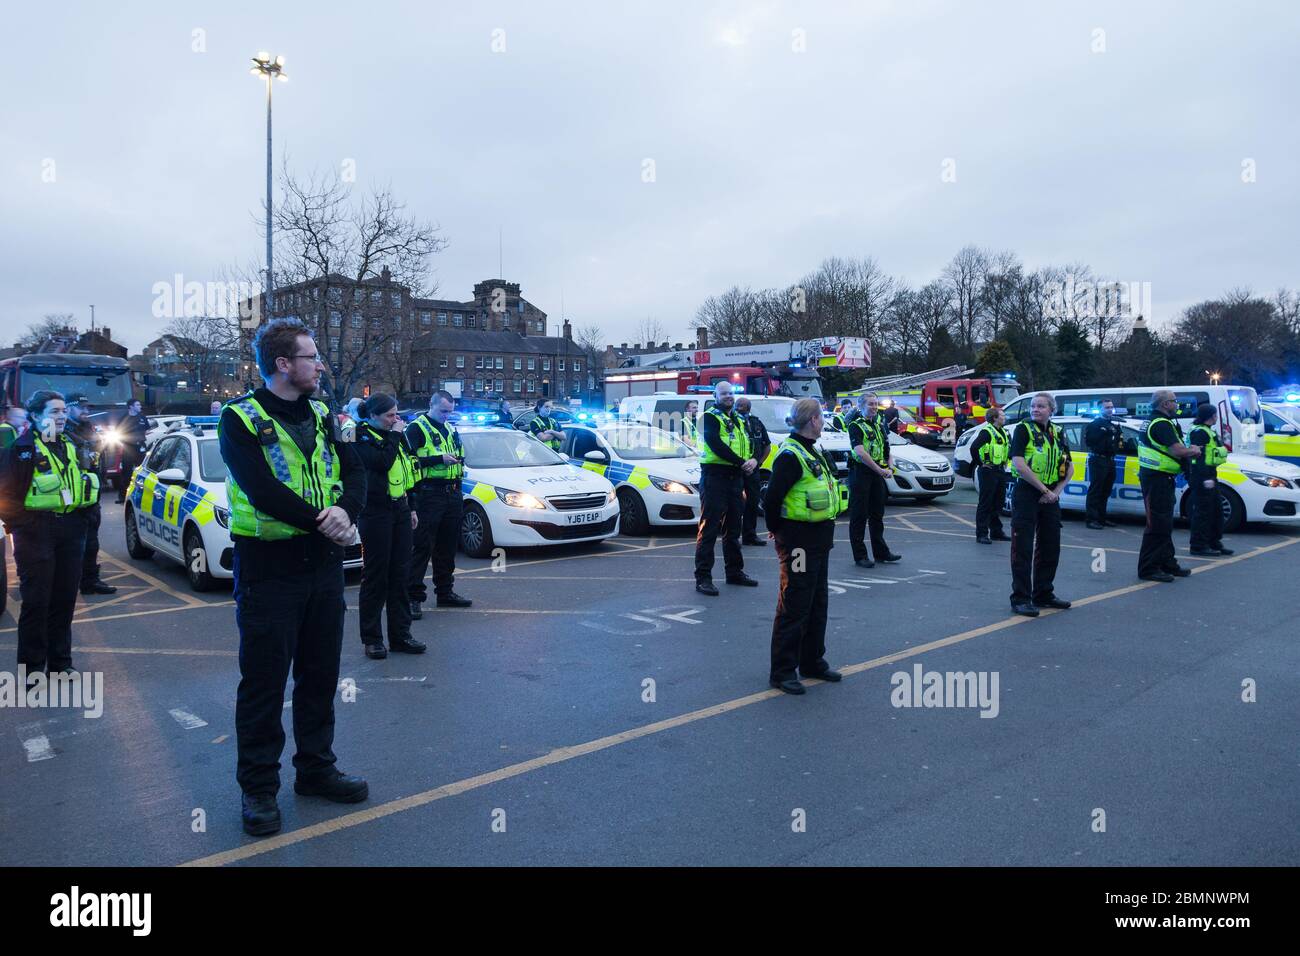 HUDDERSFIELD, WEST YORKSHIRE, UK - APRIL 9: West Yorkshire Police and West Yorkshire Fire and Rescue line up to applaud NHS workers in front of Hudder Stock Photo